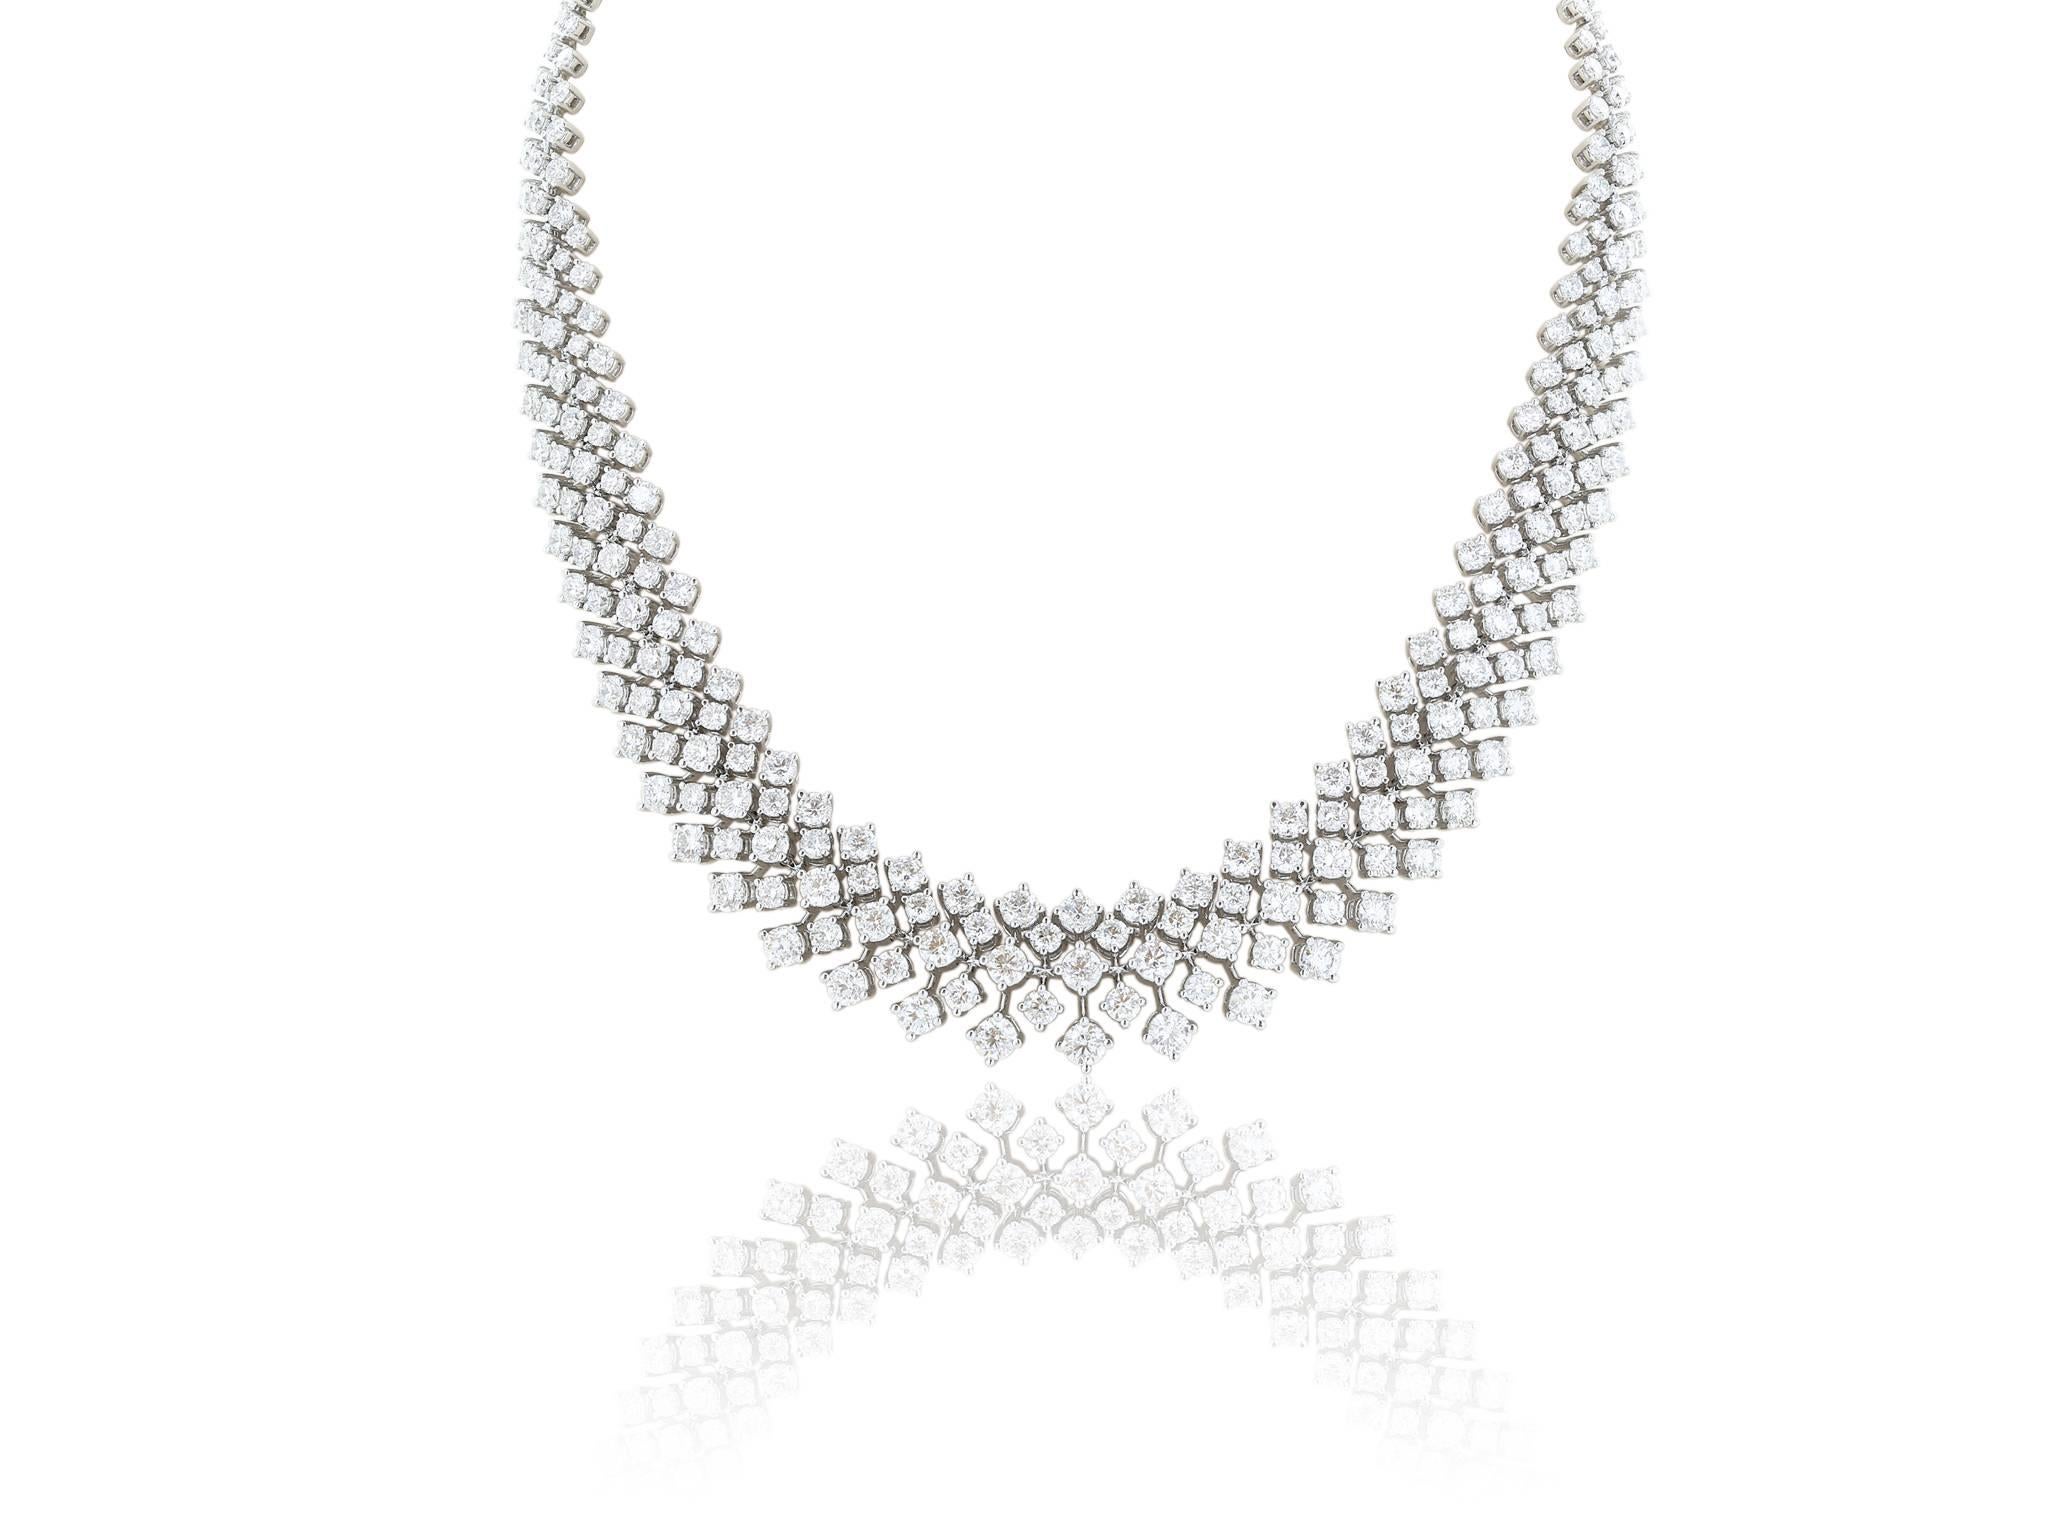 18 karat white gold ladies diamond Bib necklace, consisting of 30.50 carats tw of colorless F-G and eye clean VS2-SI1 clarity